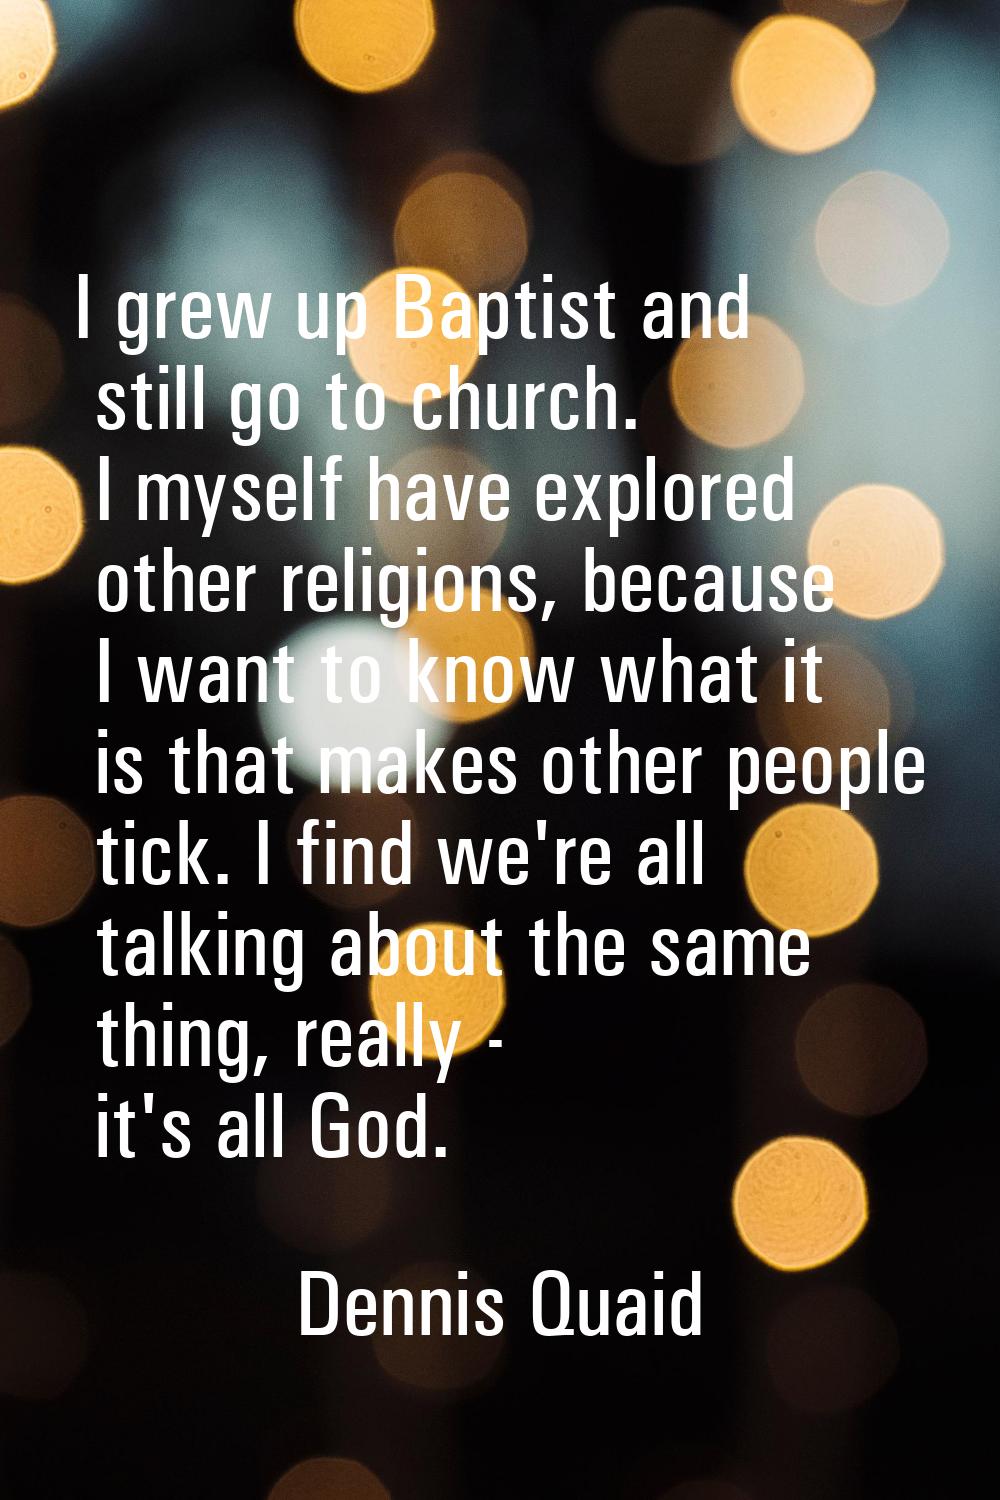 I grew up Baptist and still go to church. I myself have explored other religions, because I want to